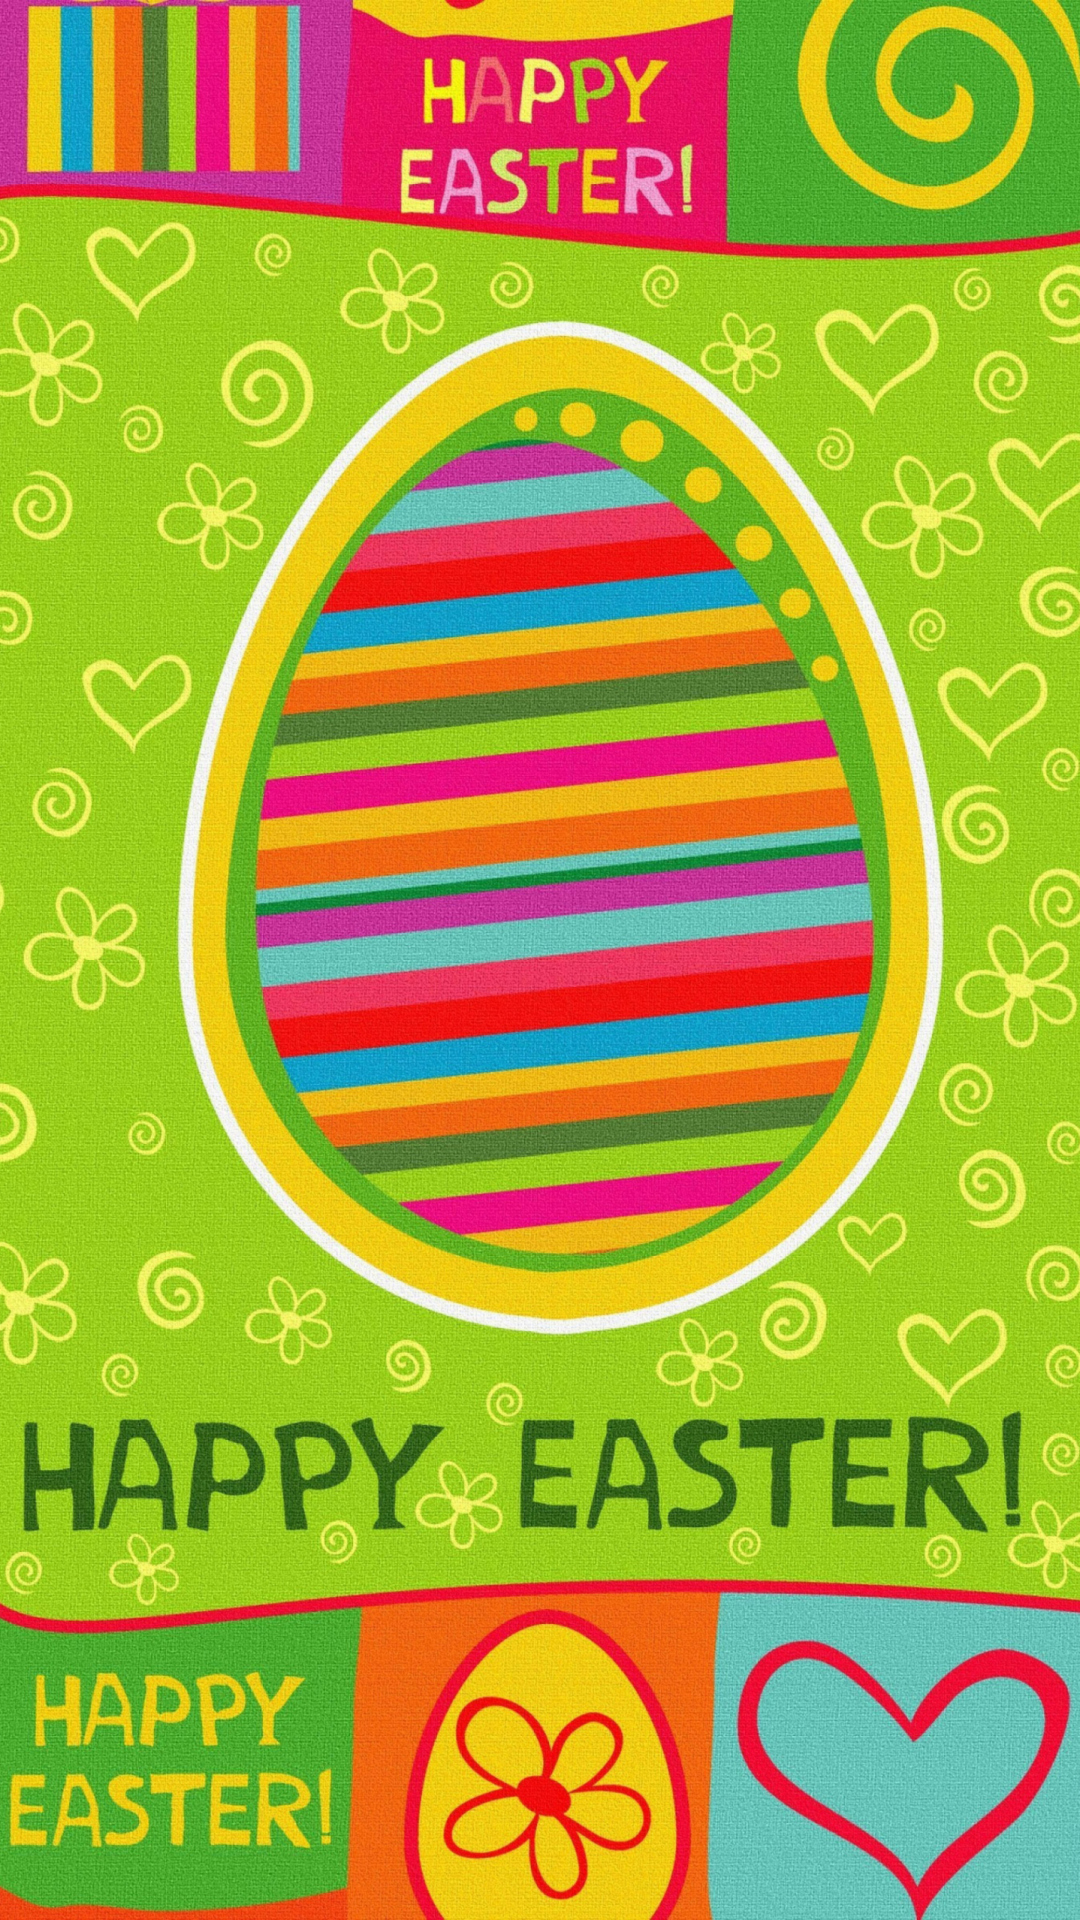 Happy Easter Background wallpaper 1080x1920